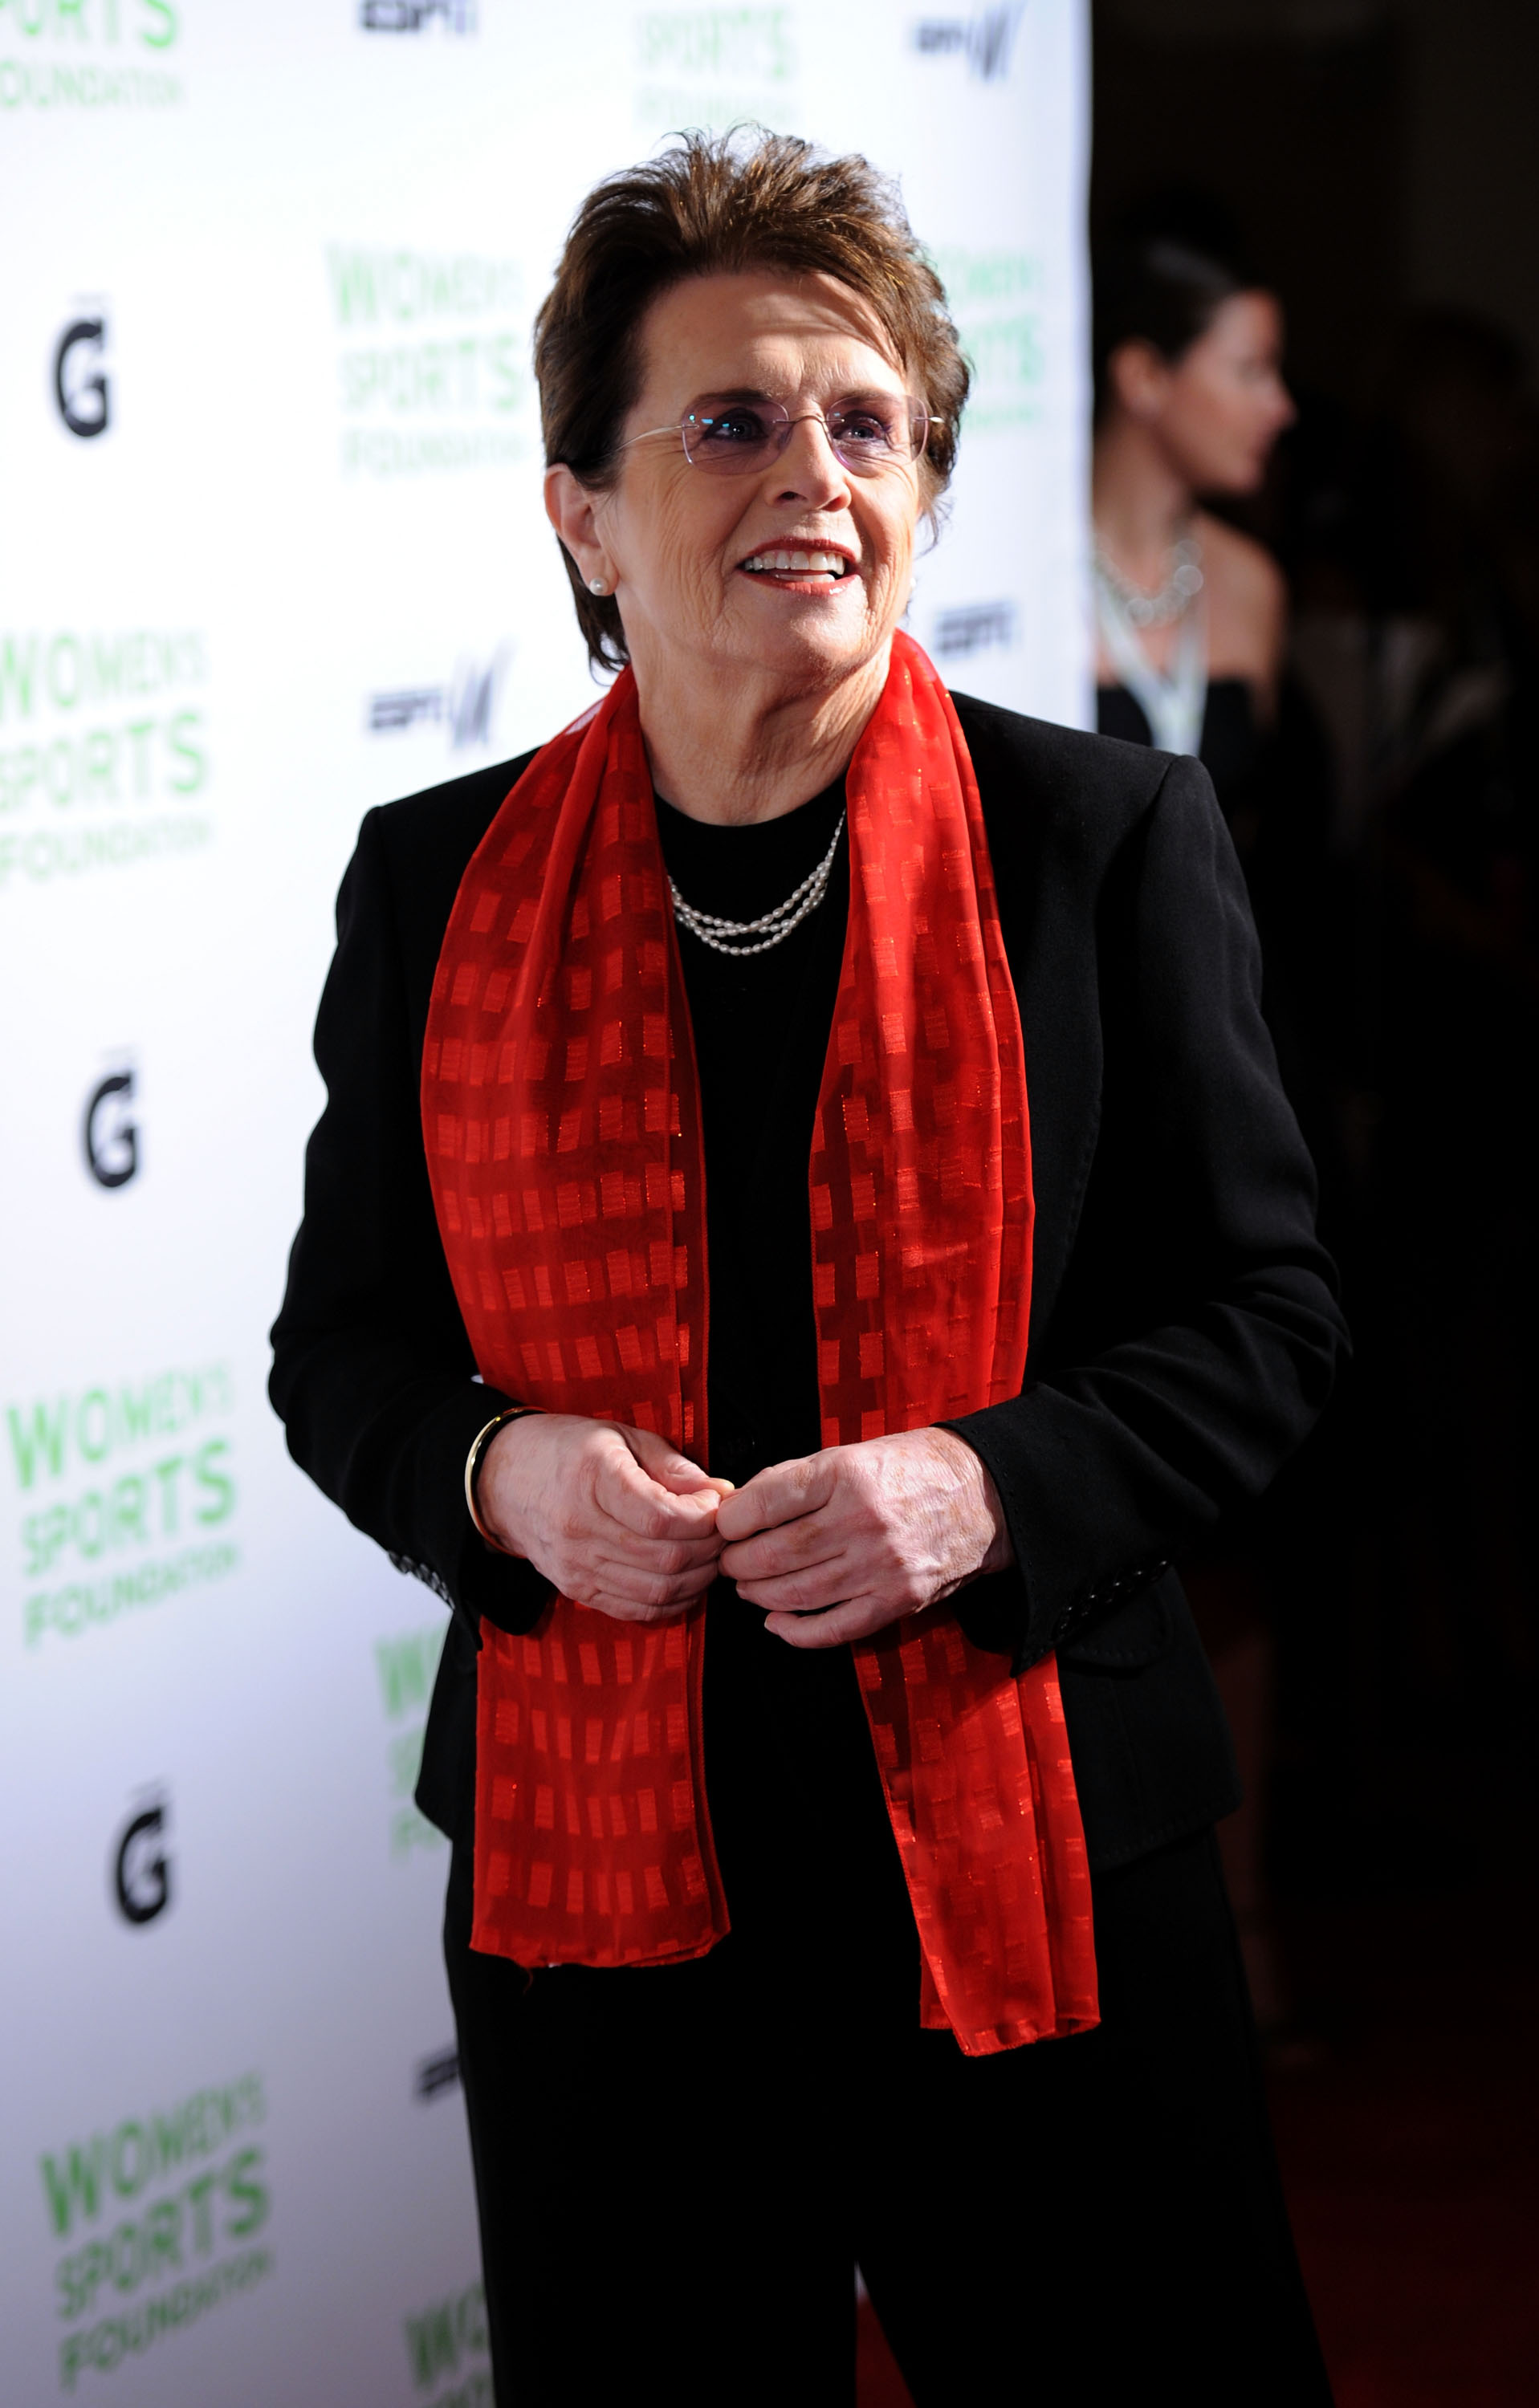 NEW YORK - OCTOBER 12:  Womens Sports Foundation Founder Billie Jean King attends the 32nd Annual Salute to Women in Sports gala at The Waldorf=Astoria on October 12, 2010 in New York City.  (Photo by Bryan Bedder/Getty Images)